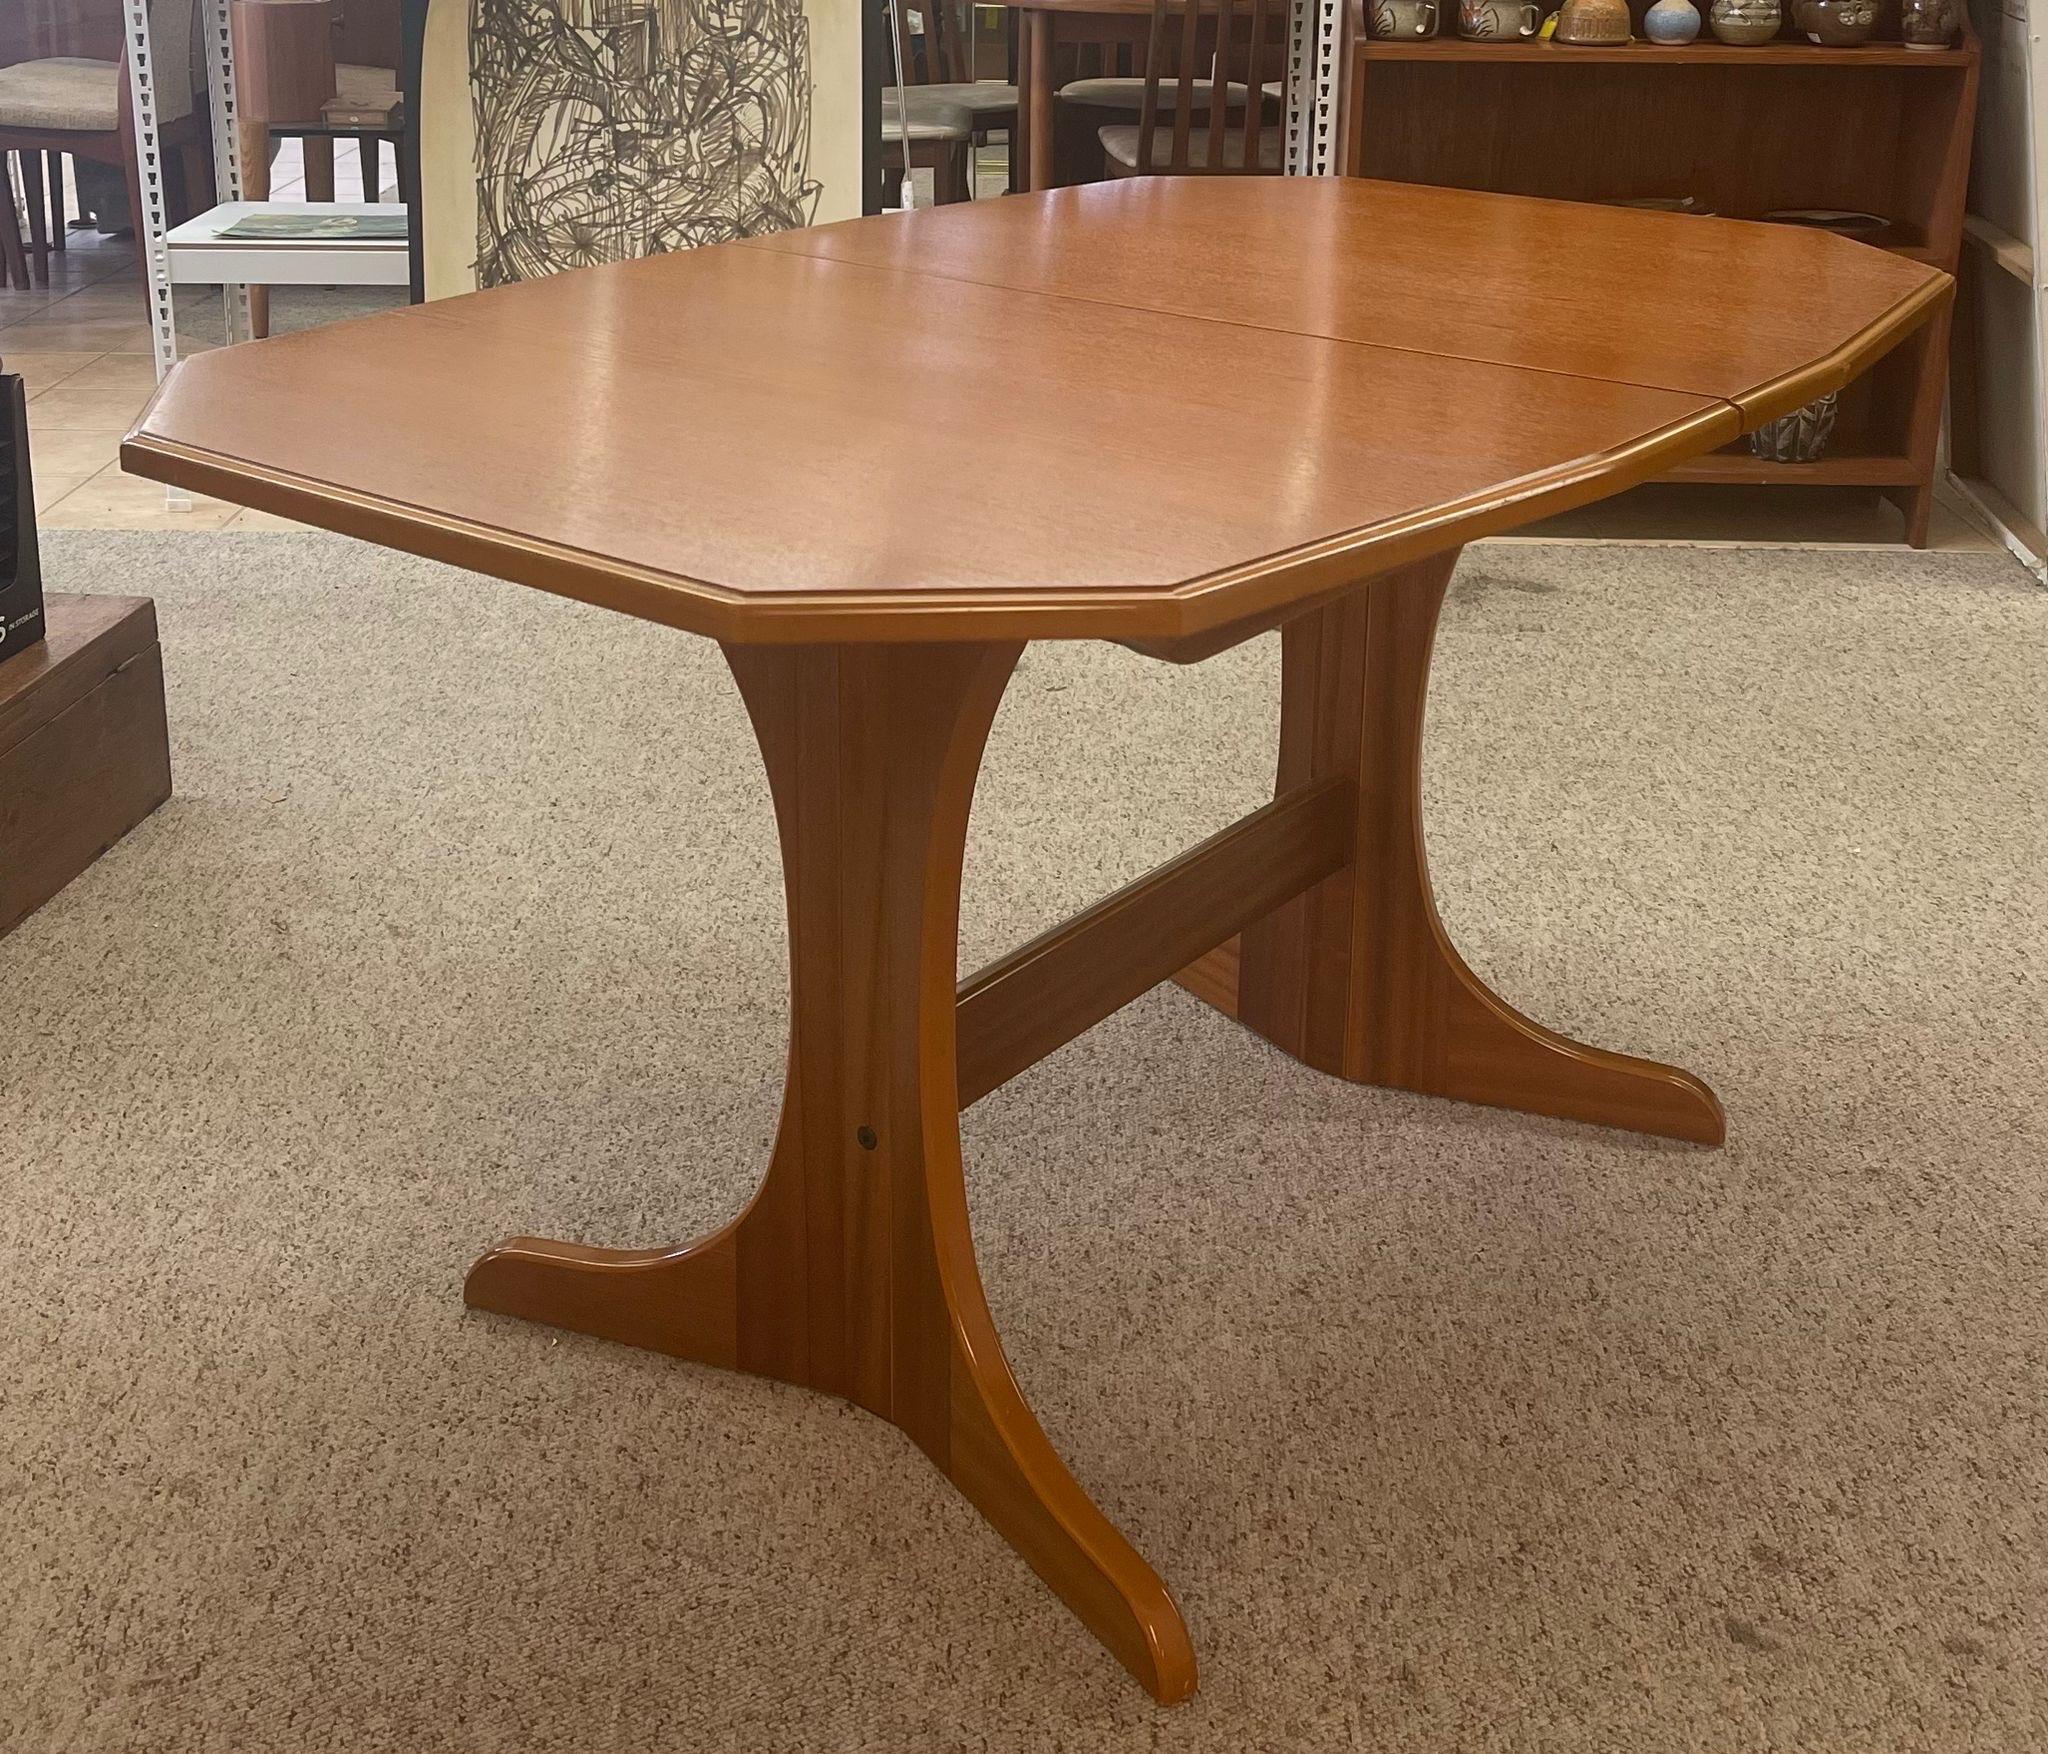 Late 20th Century Vintage Mid Century Modern Dining Table With Butterfly Leaf Insert For Sale